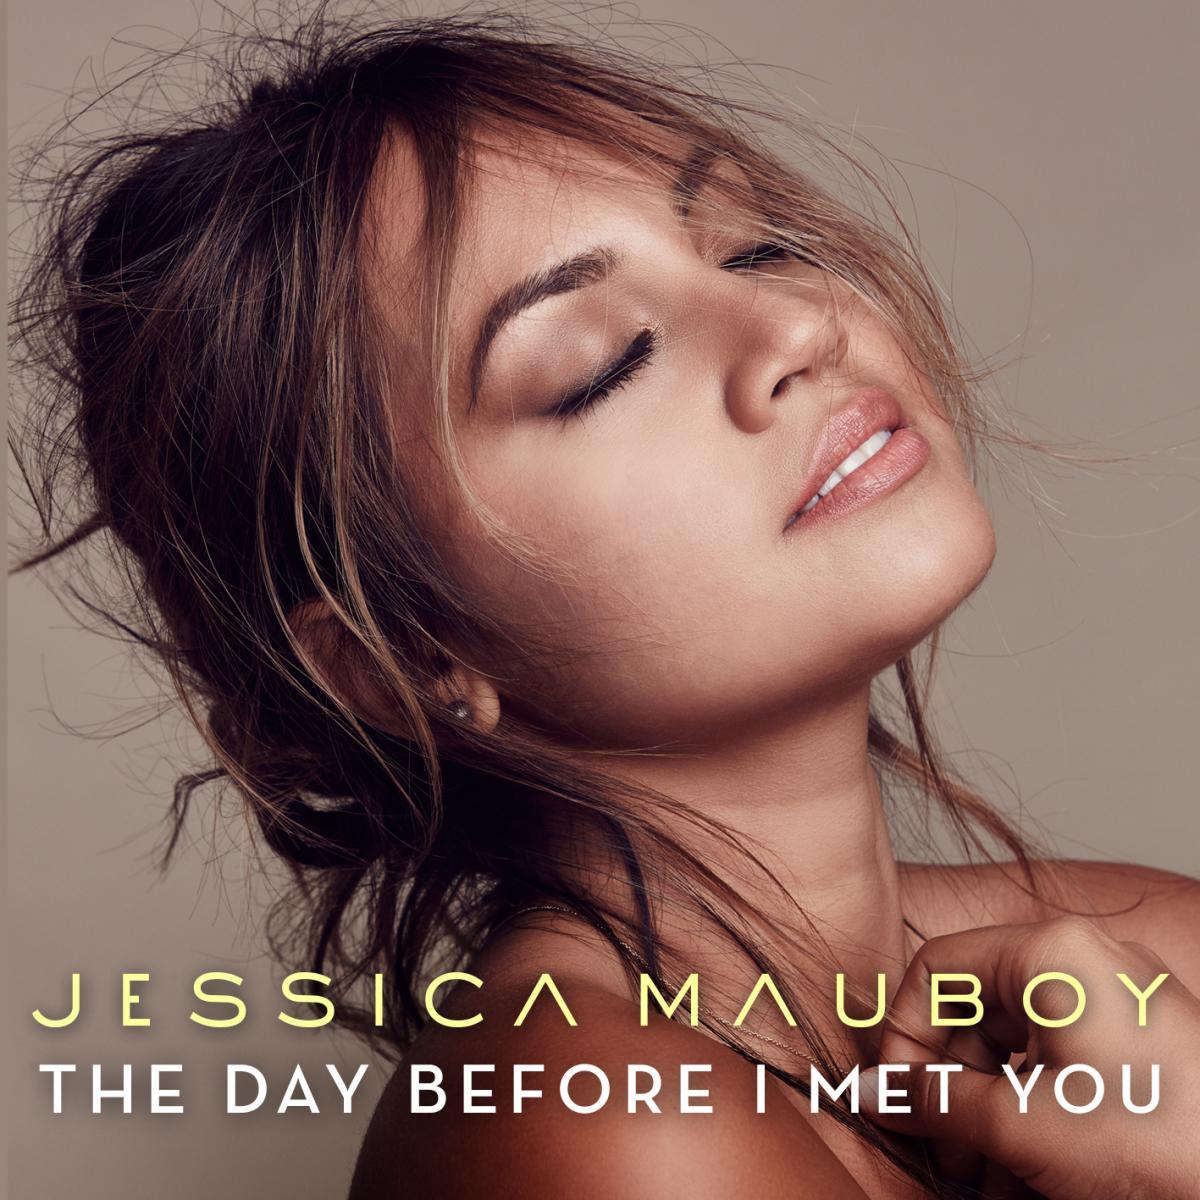 Jessica Mauboy: The Day Before I Met You (Vídeo musical)